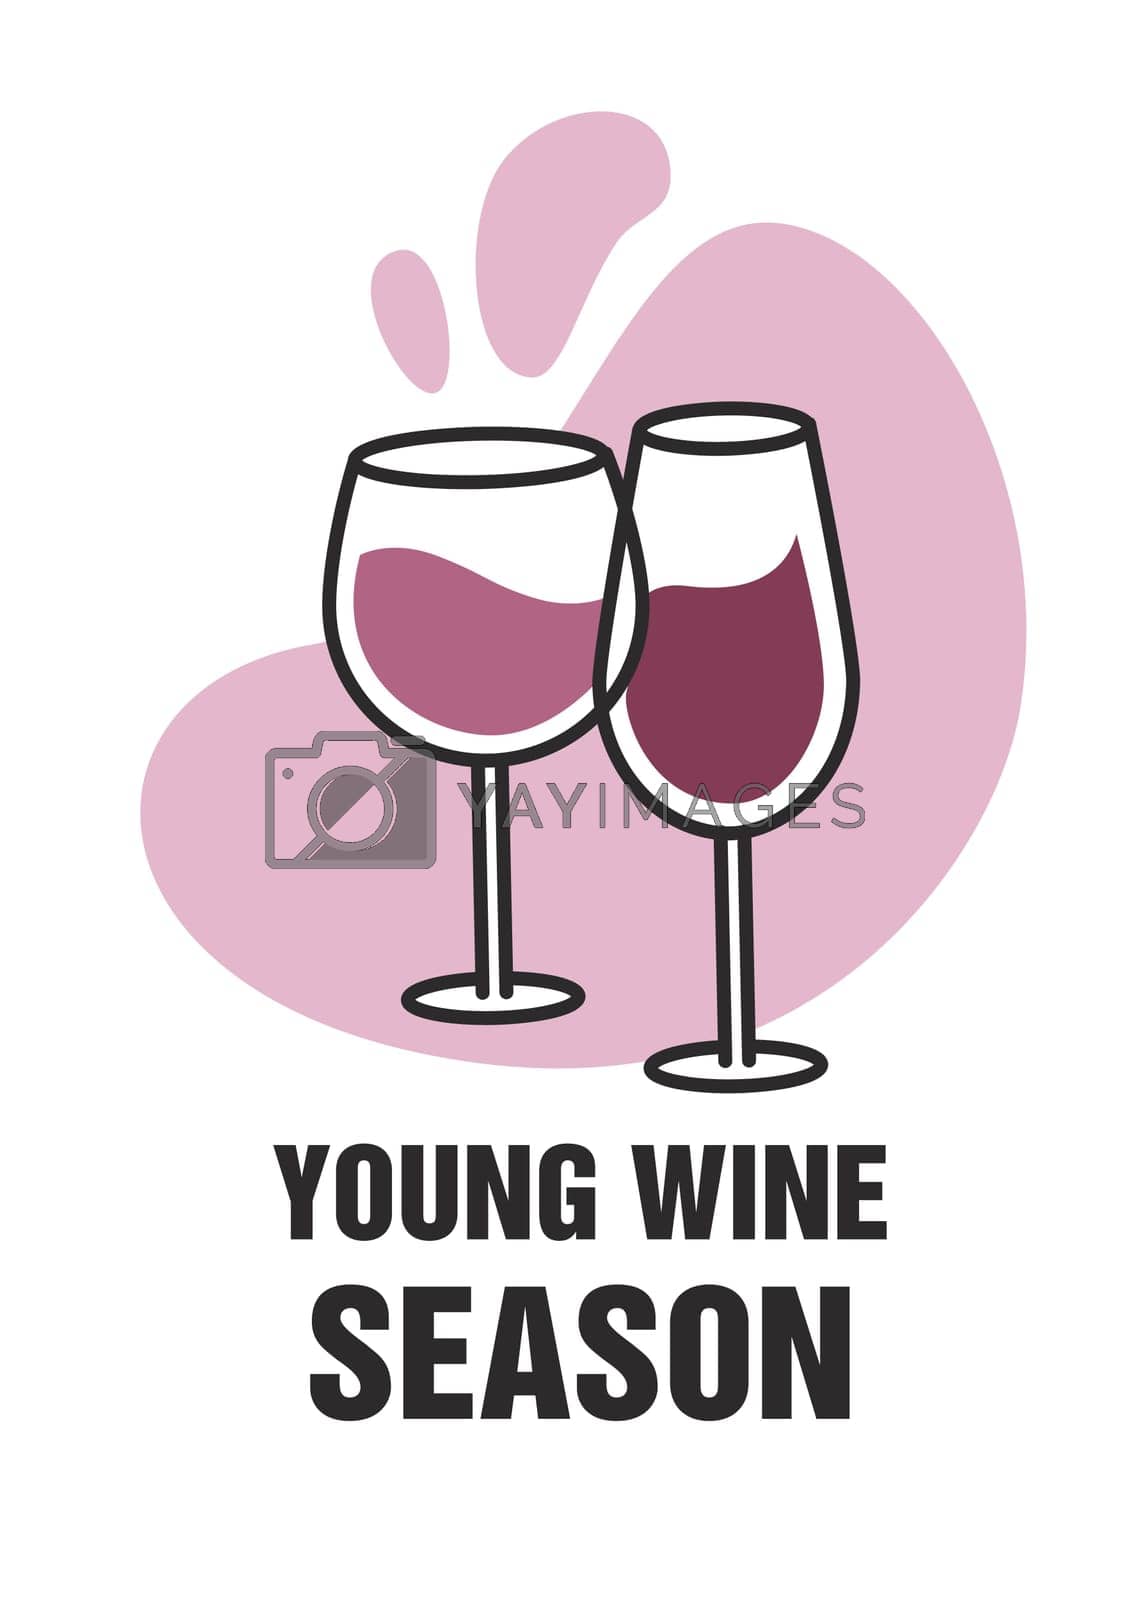 Royalty free image of Young wine season, degustation and tasting vector by Sonulkaster